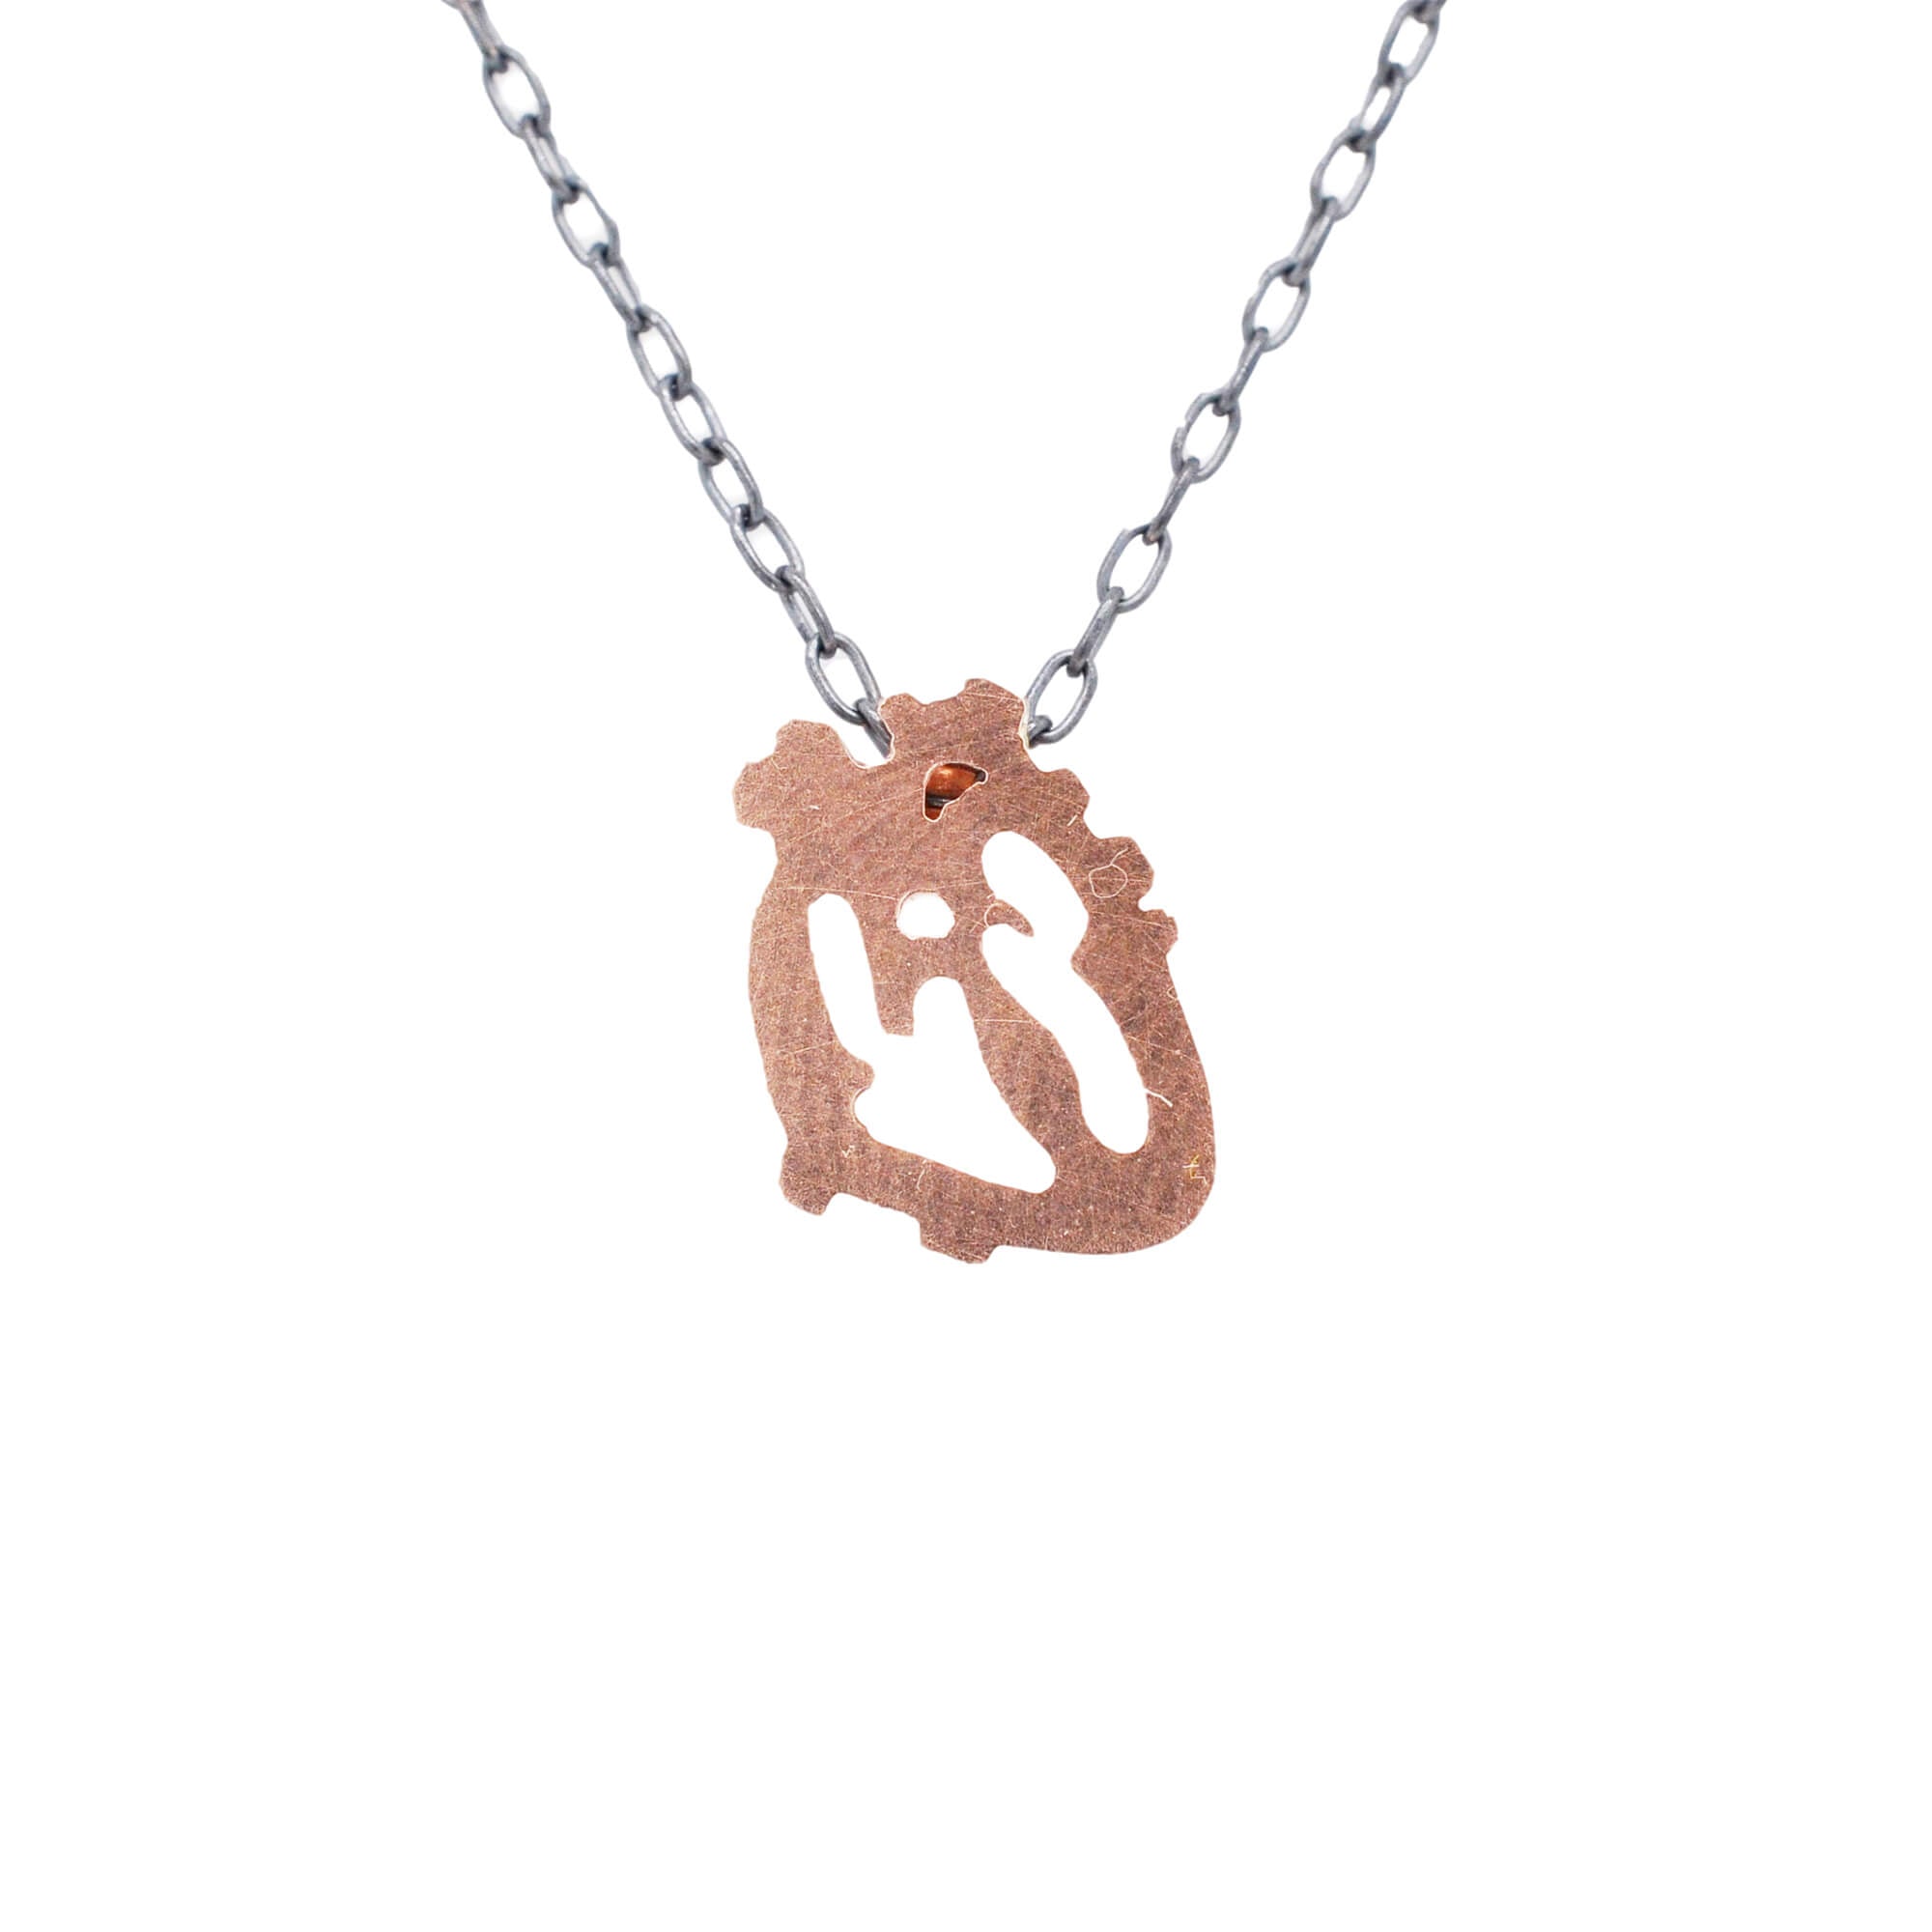 Rose gold anatomical heart on an oxidized silver chain. Handmade by EC Design Studio in Minneapolis, MN using recycled metal.